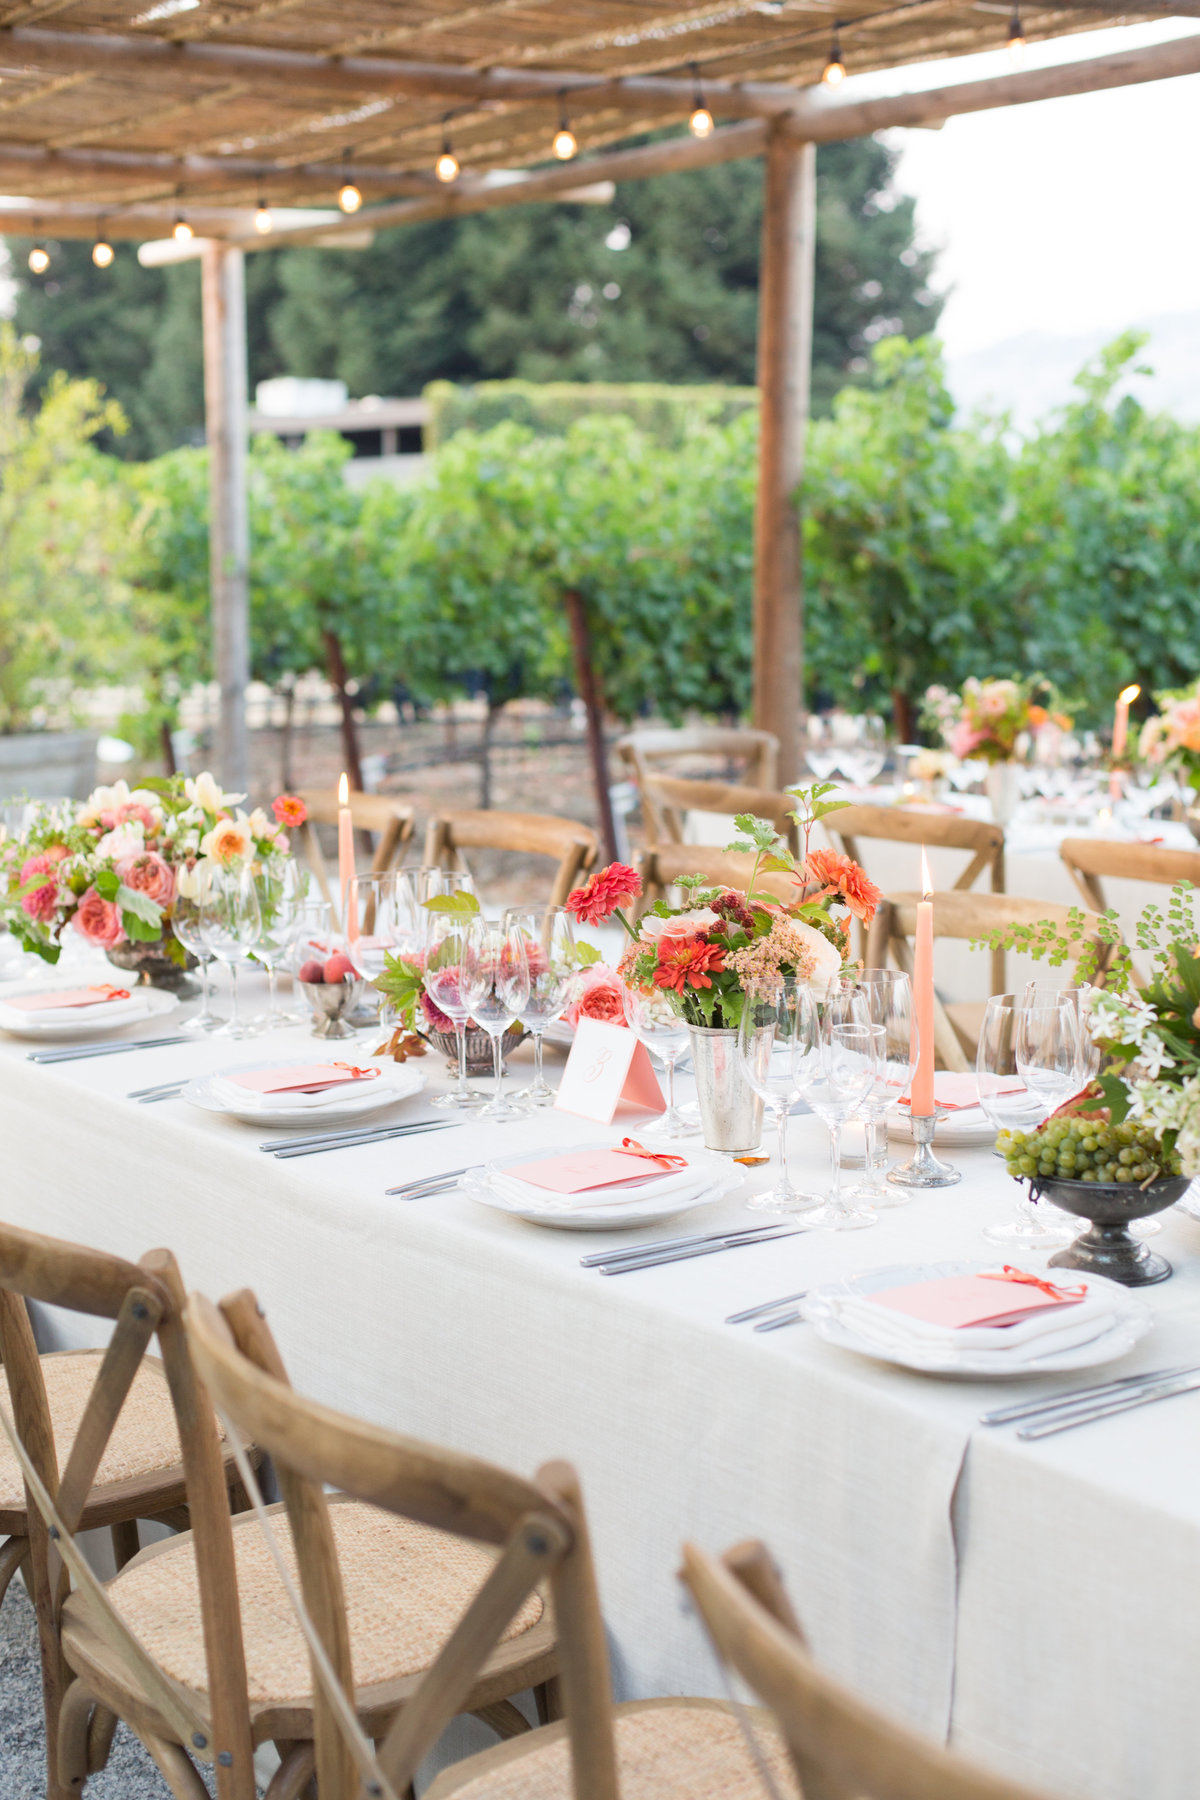 Social event by Jenny Schneider Events at Round Pond Estate in Napa Valley, California. Photo by Eric Kelley Photography.